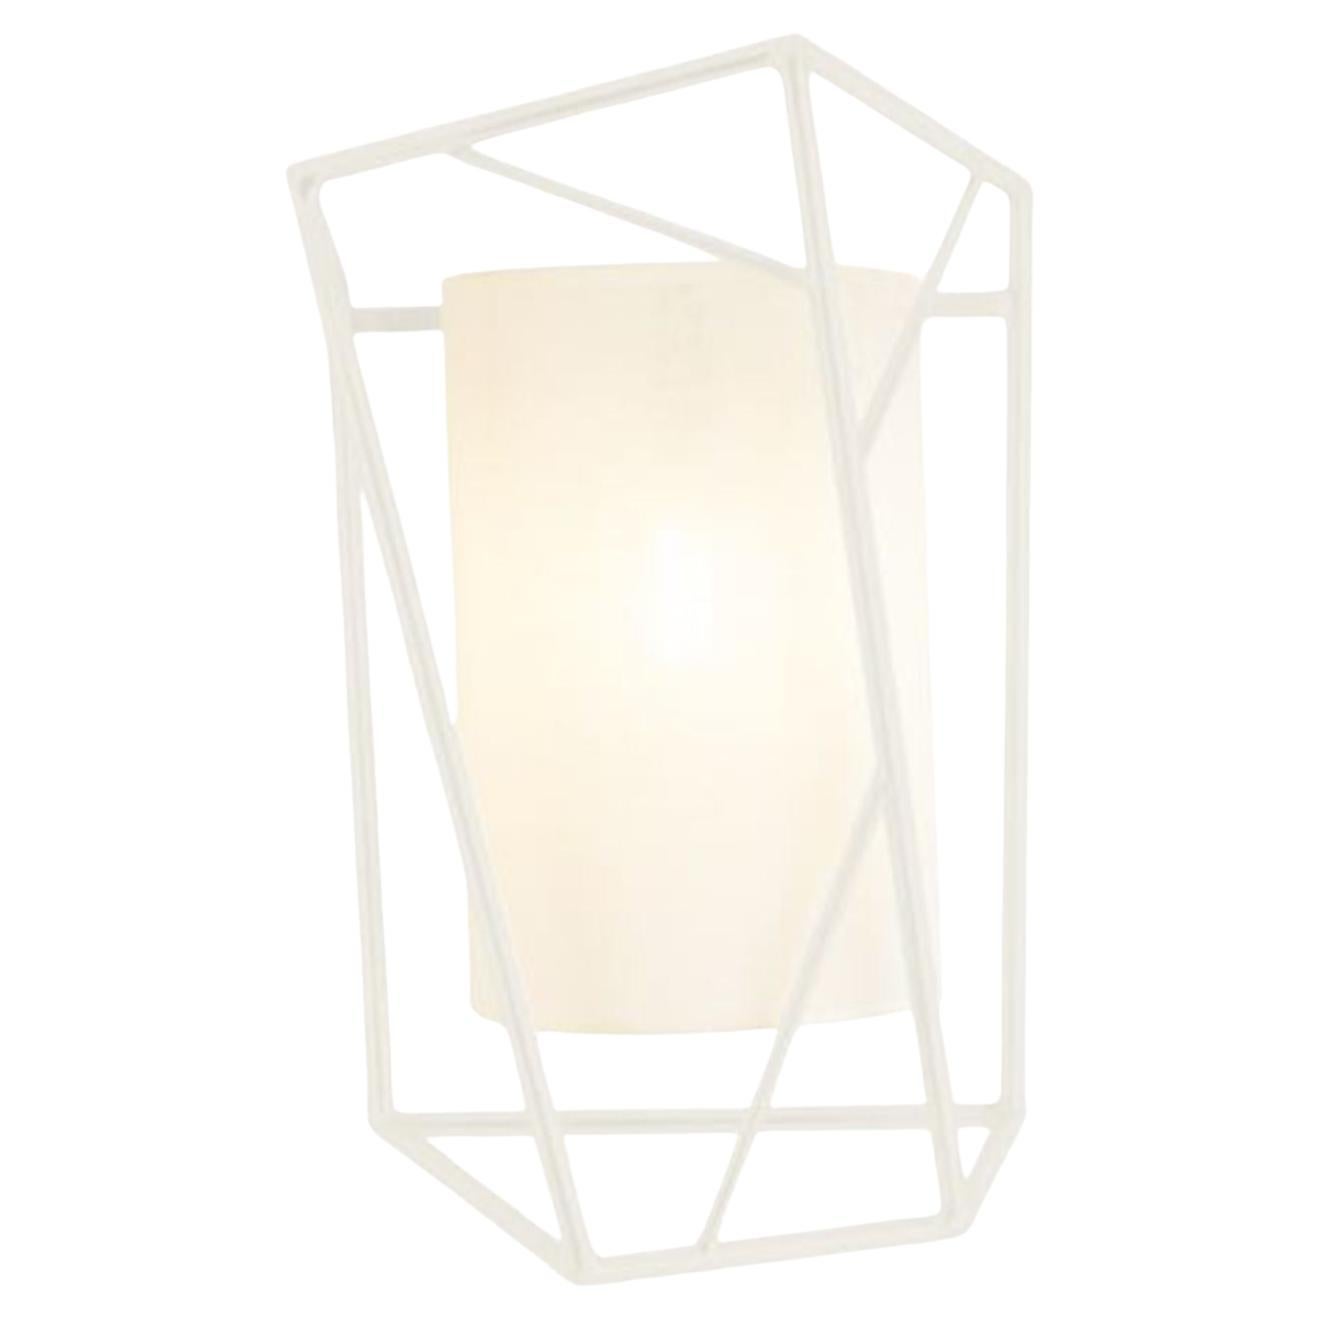 Ivory Star Wall Lamp by Dooq